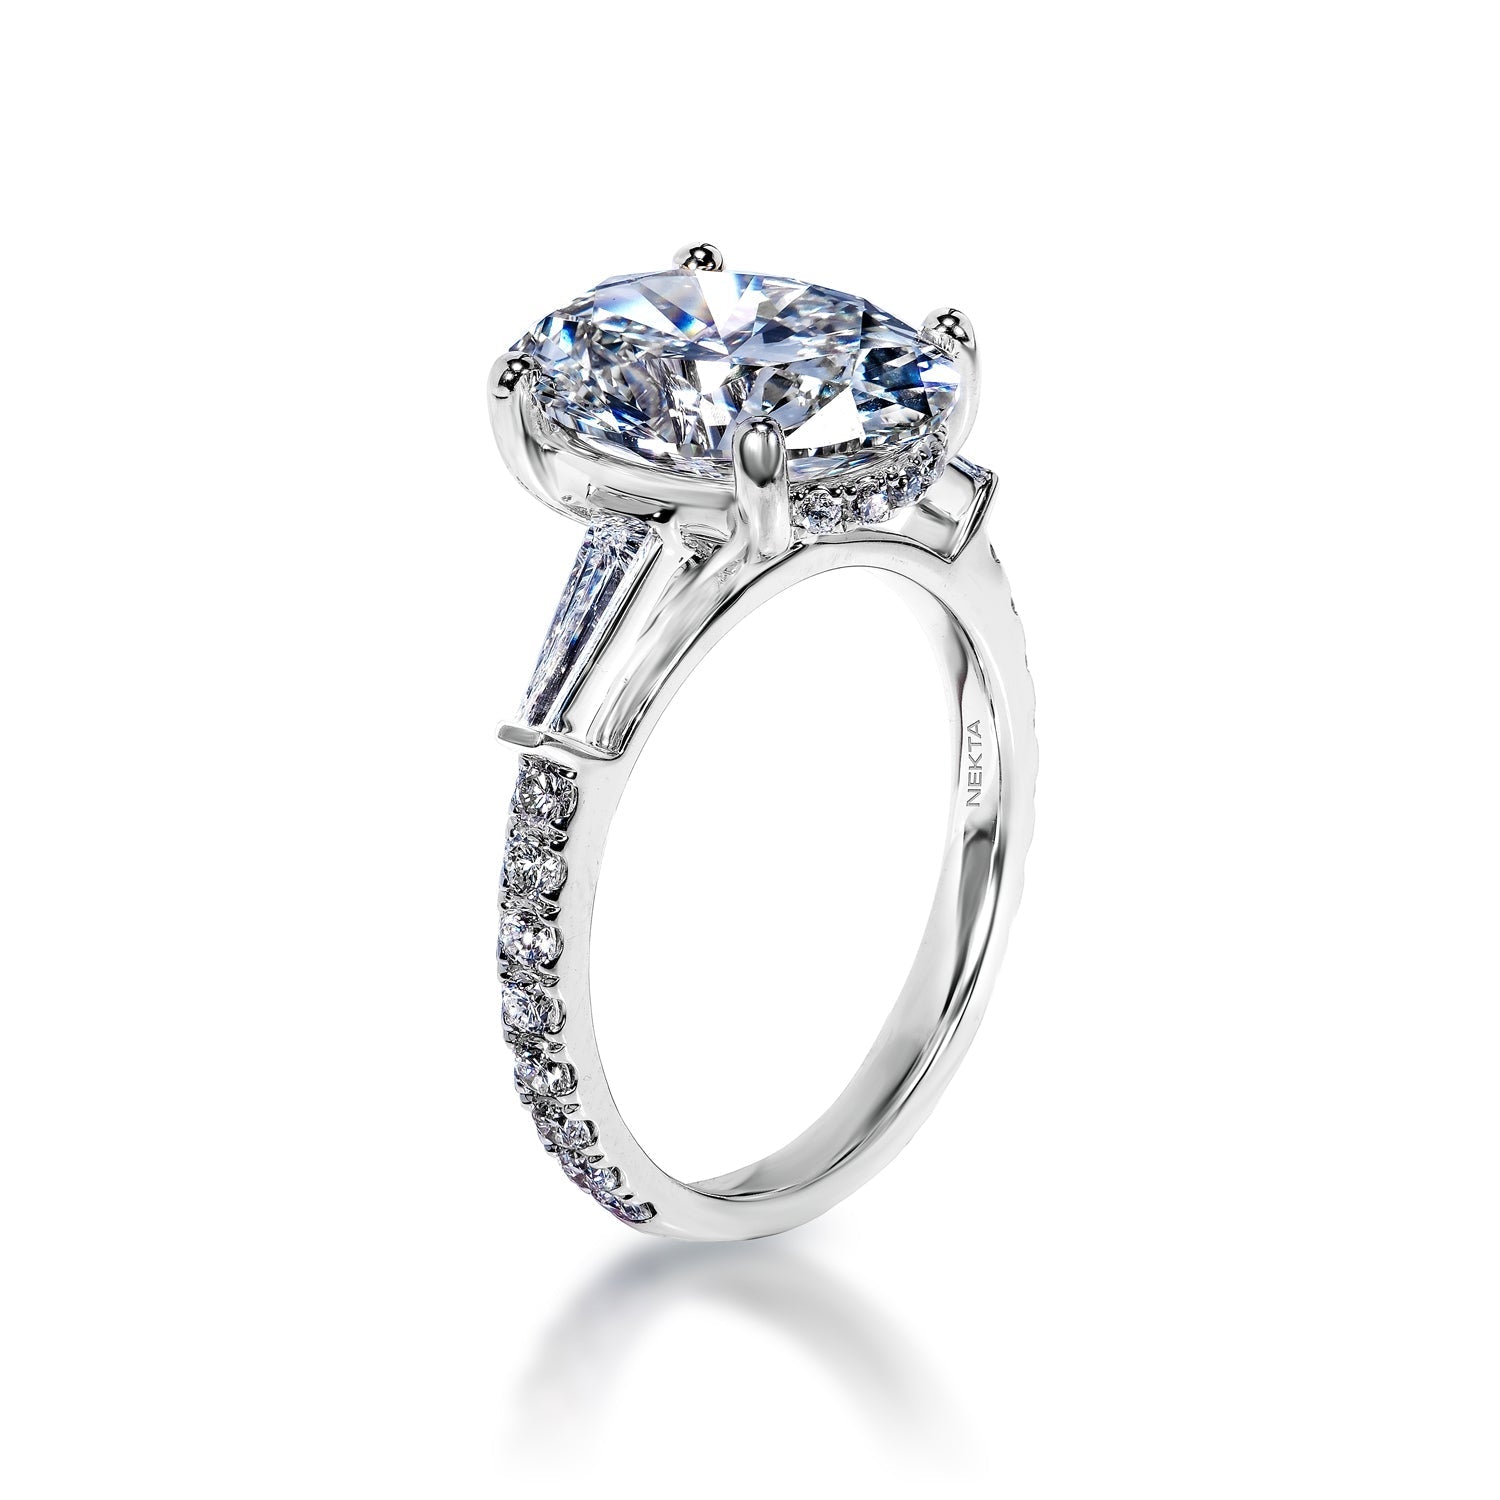 Lael 5 Carats I VS2 Lab Grown Oval Cut Diamond Engagement Ring in 18k White Gold Side View